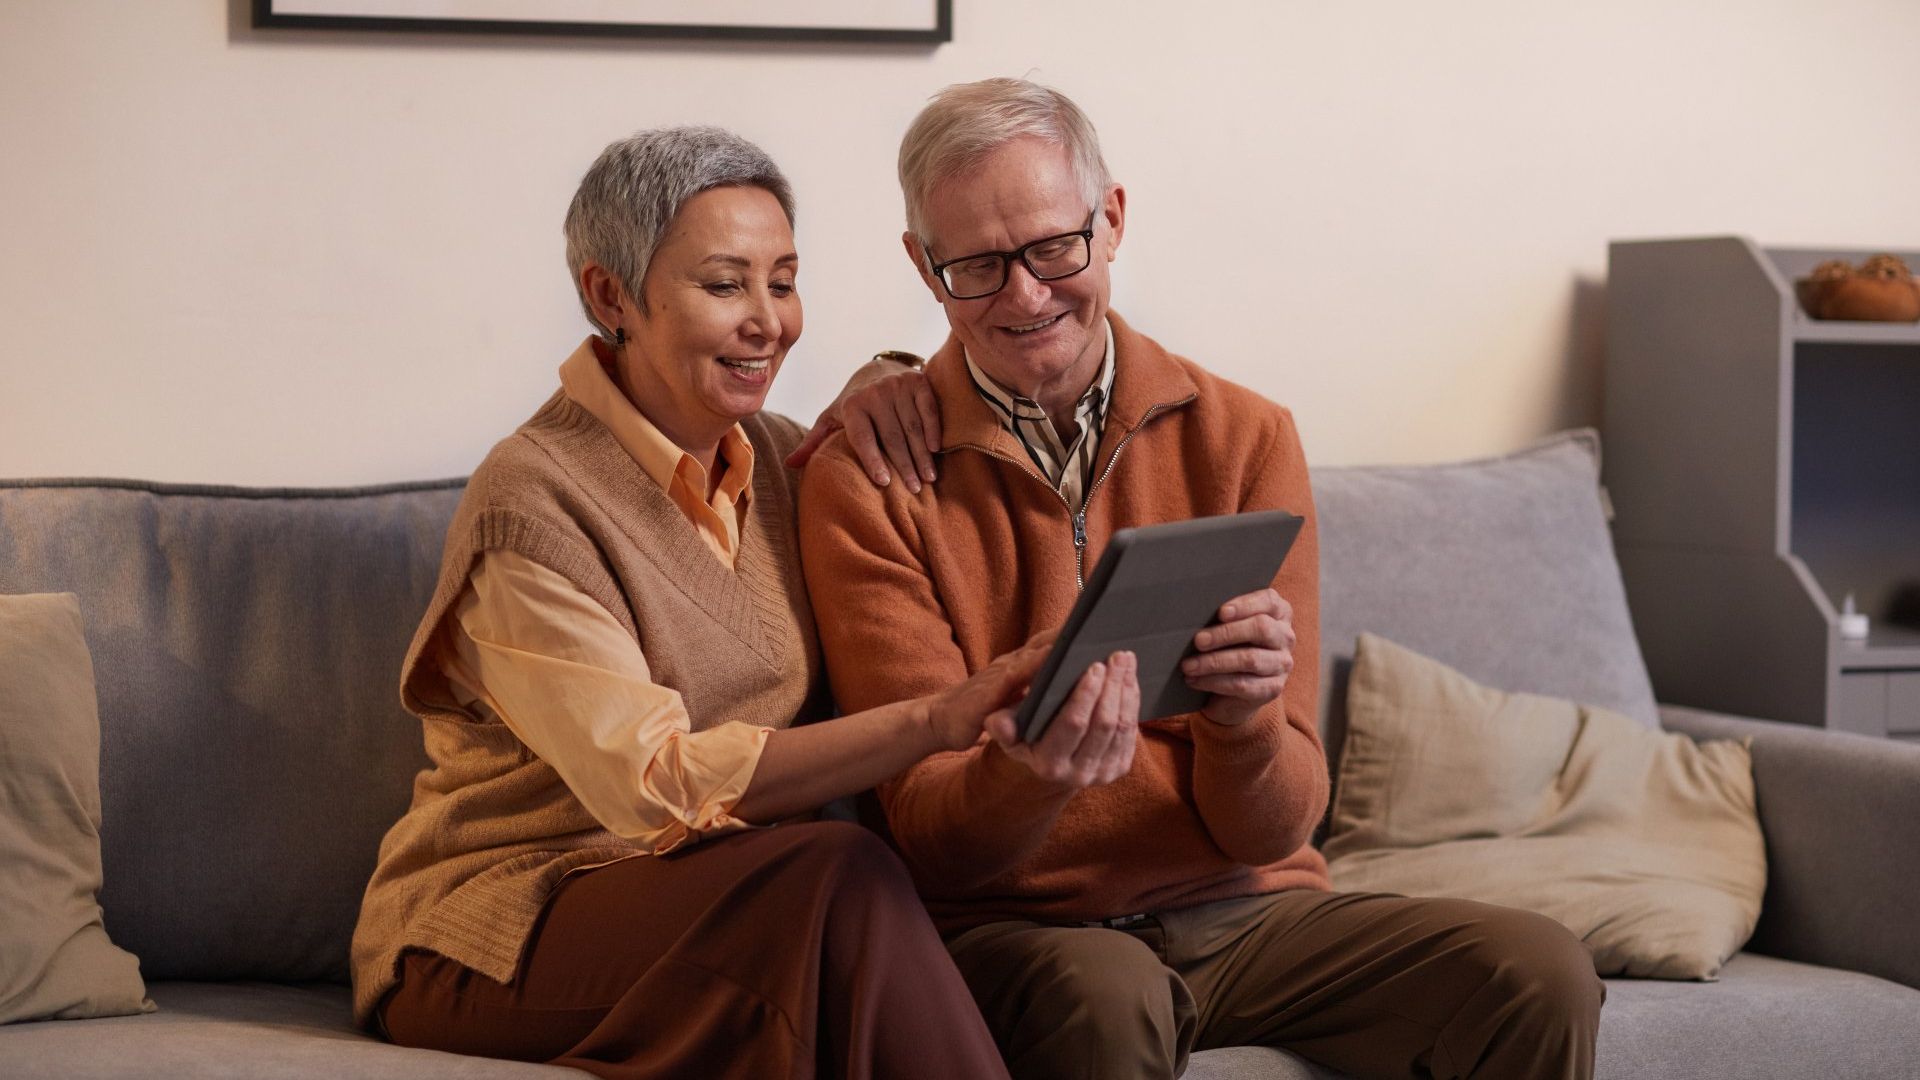 Man and women sitting on a couch looking at a tablet.